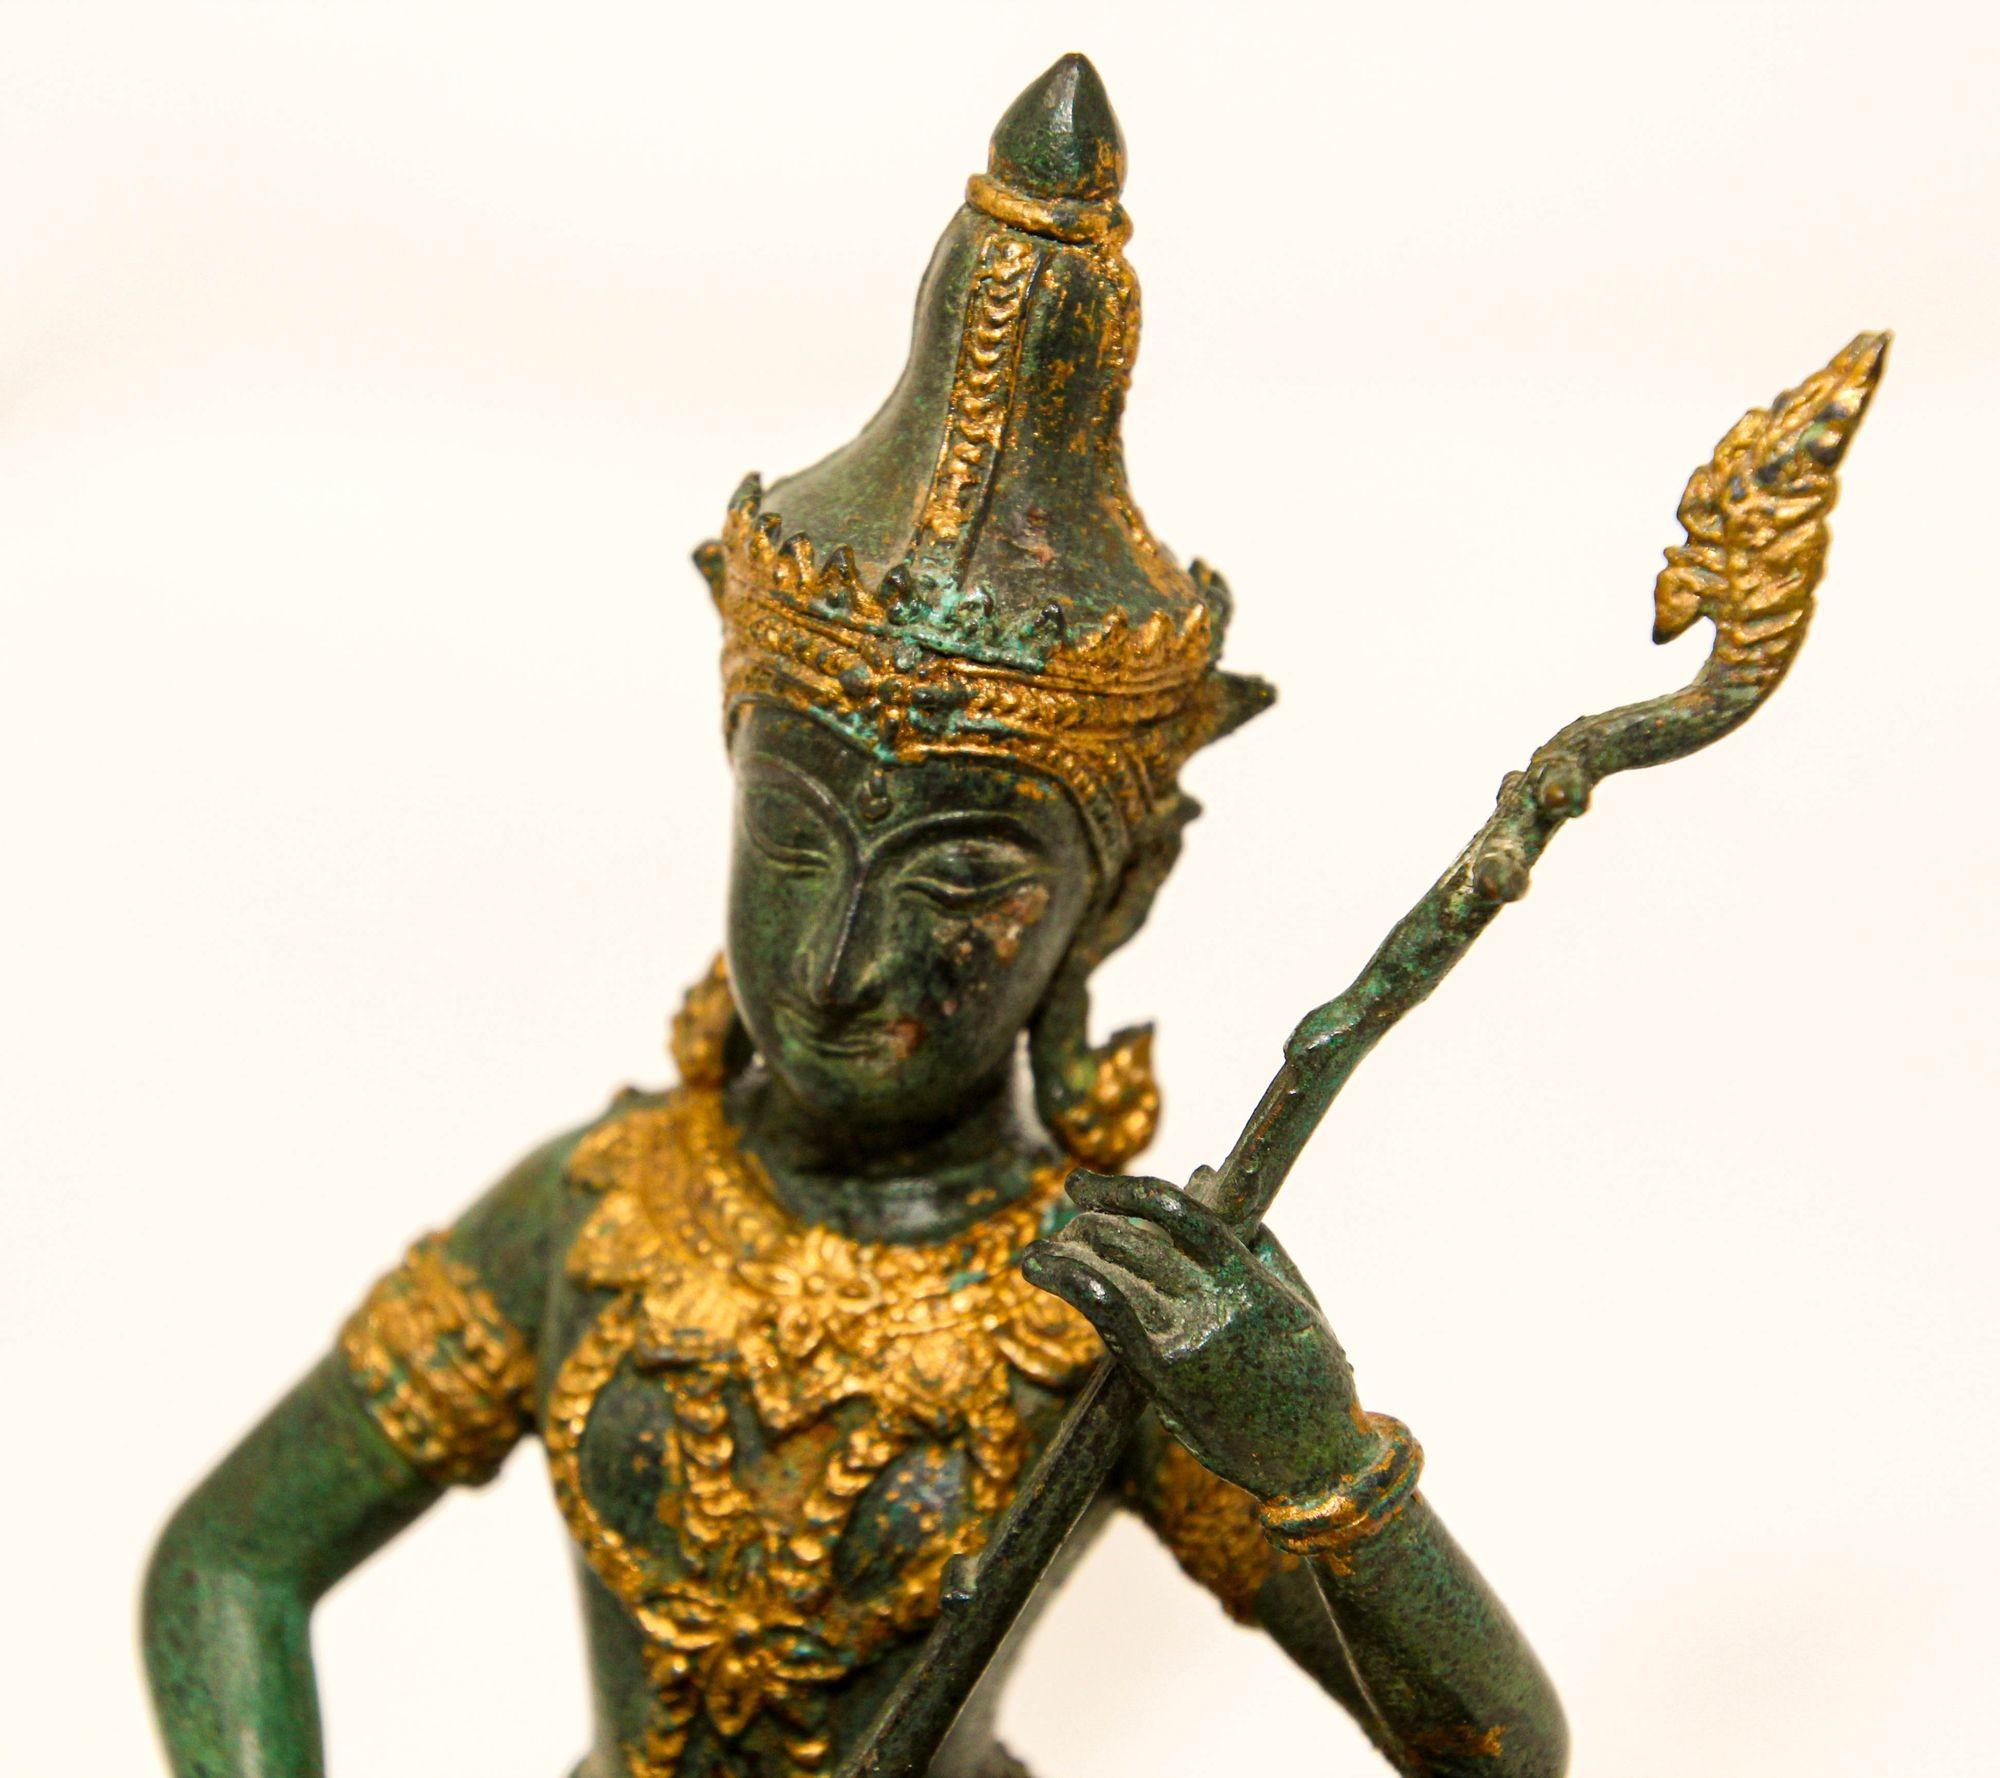 Vintage Gilt Bronze Asian Sculpture of a Thai Deity Prince Playing Music 1950's.
Gilt cast bronze sculpture of a religious Thai deity sitting with one knee raised as he plays a musical instrument.
Warm appearance and quality finish Displaying a